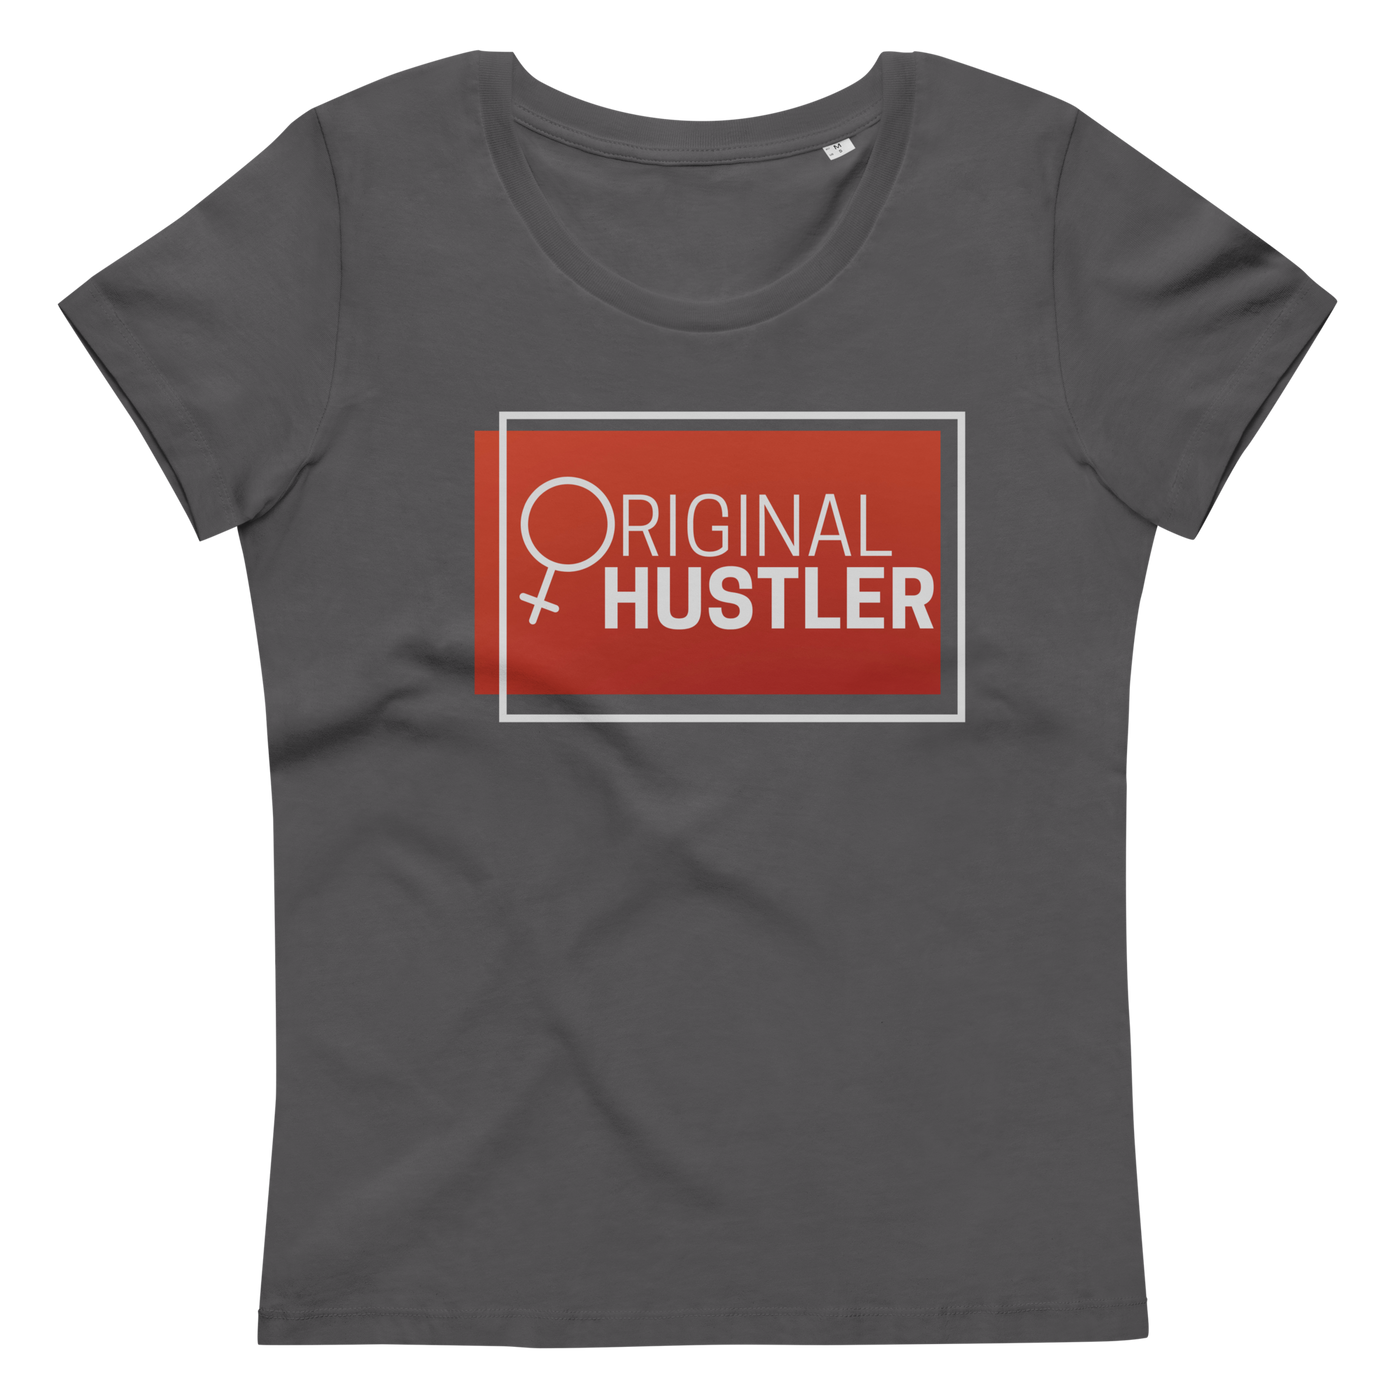 Get trendy with Women's fitted eco tee - Original Hustler -  available at SWCH Store. Grab yours for £30 today!